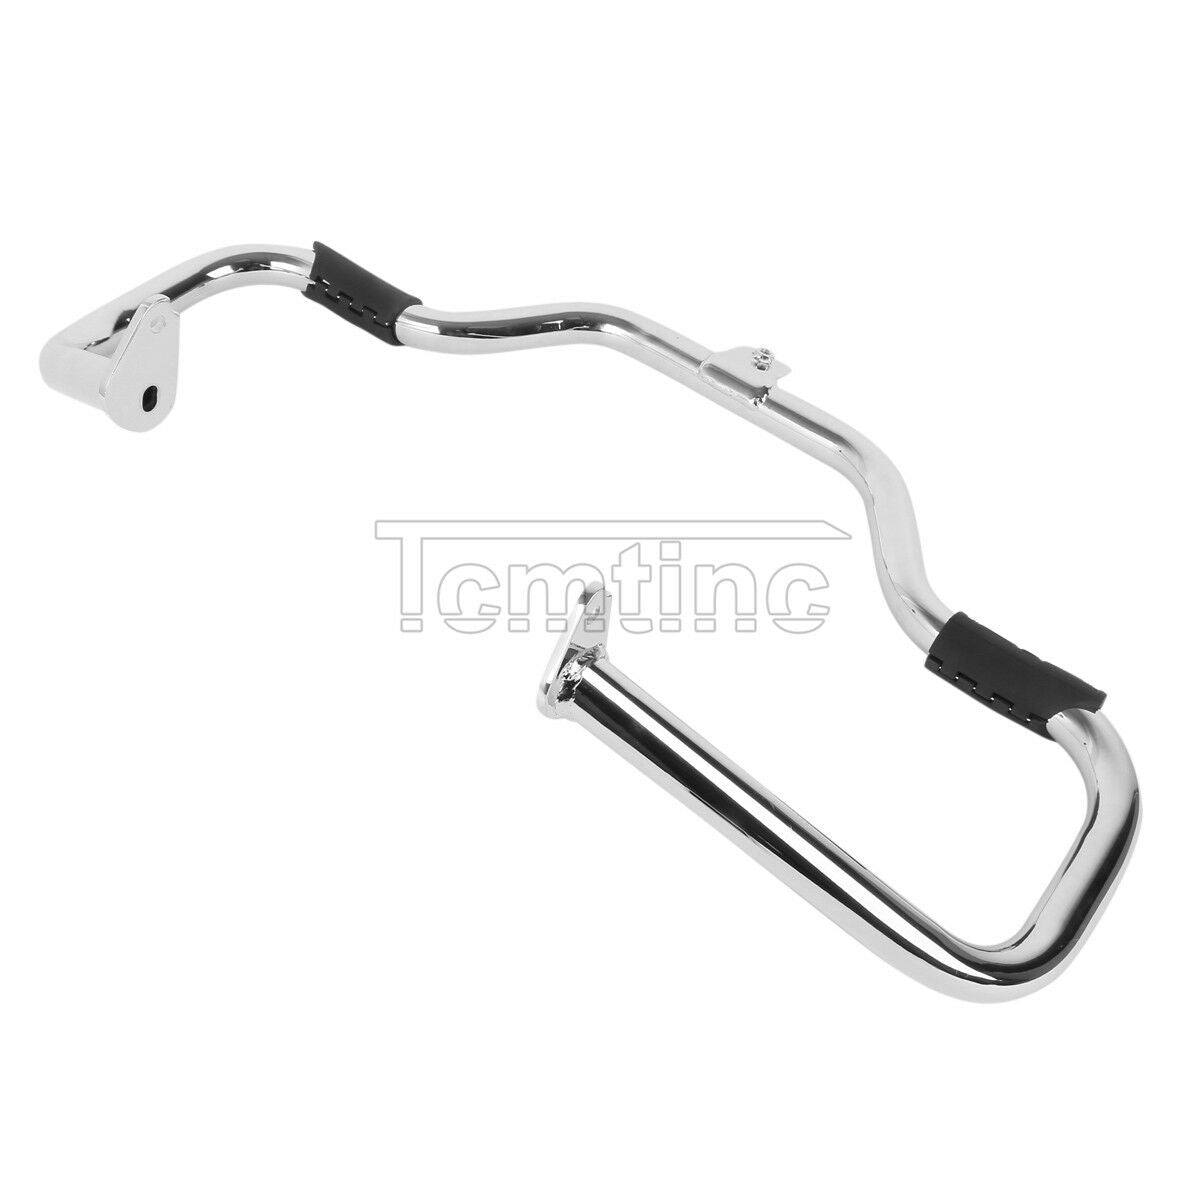 Chrome/Black Engine Highway Guard Crash Bar Fit For Harley Touring 1997-2008 07 - Moto Life Products